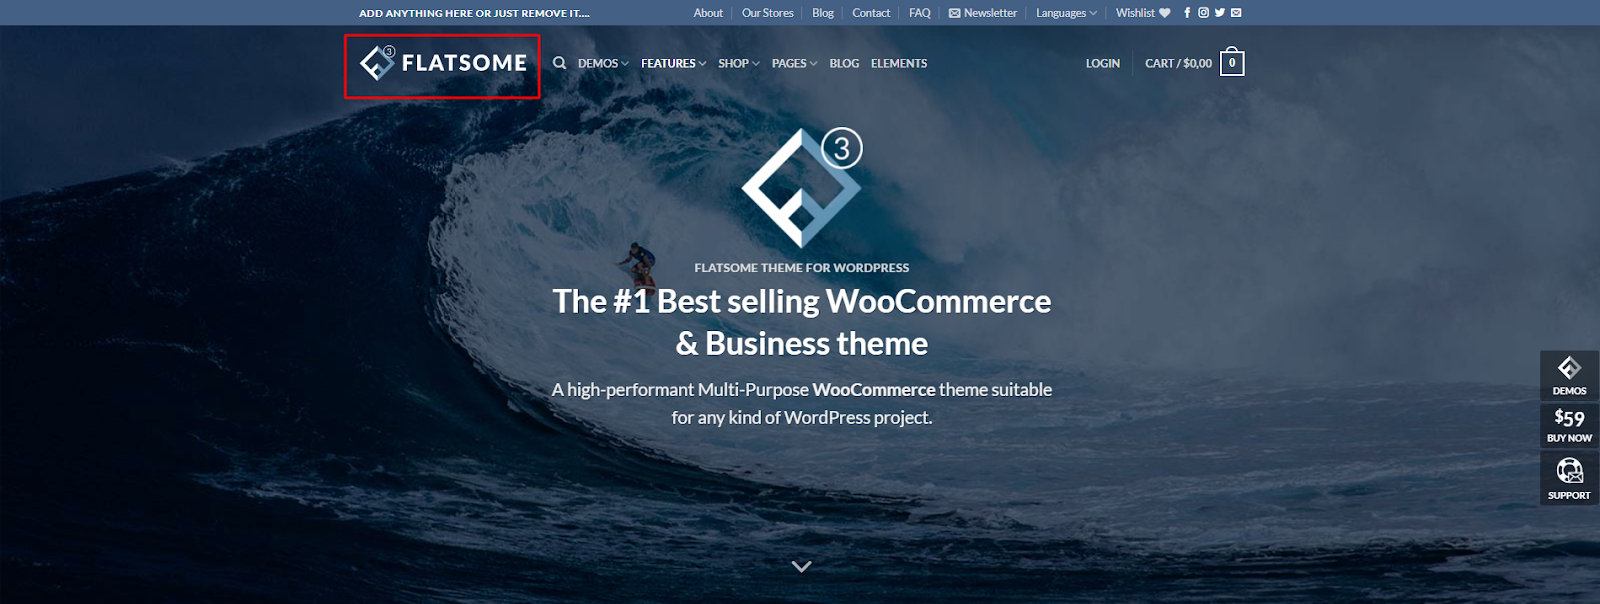 Flatsome - Responsive WooCommerce Theme with Multiple Function 